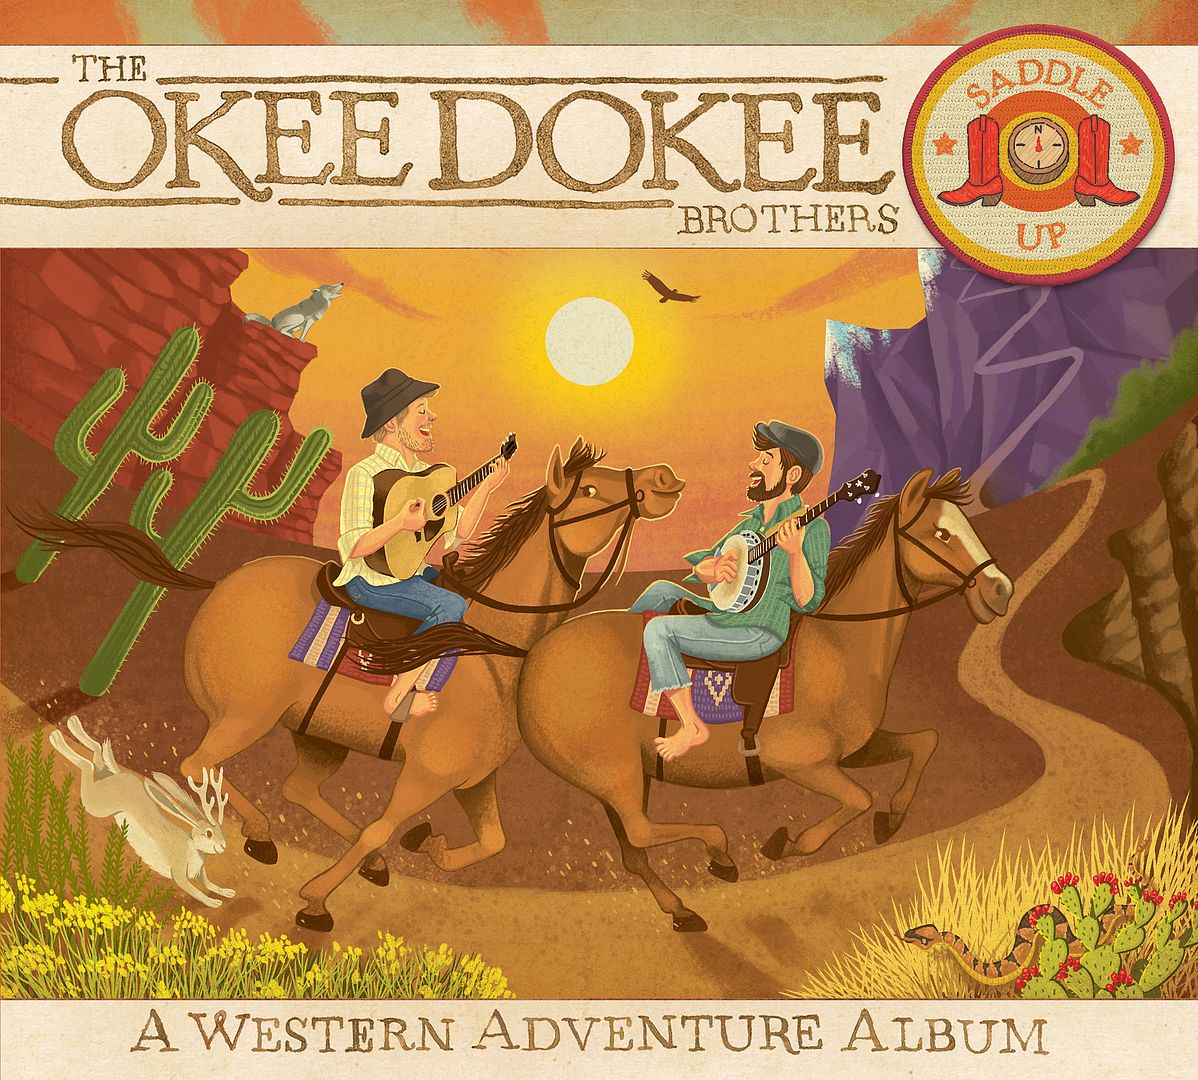 Grammy nominees for Best Children's Album: Saddle Up by The Okee Dokee Brothers